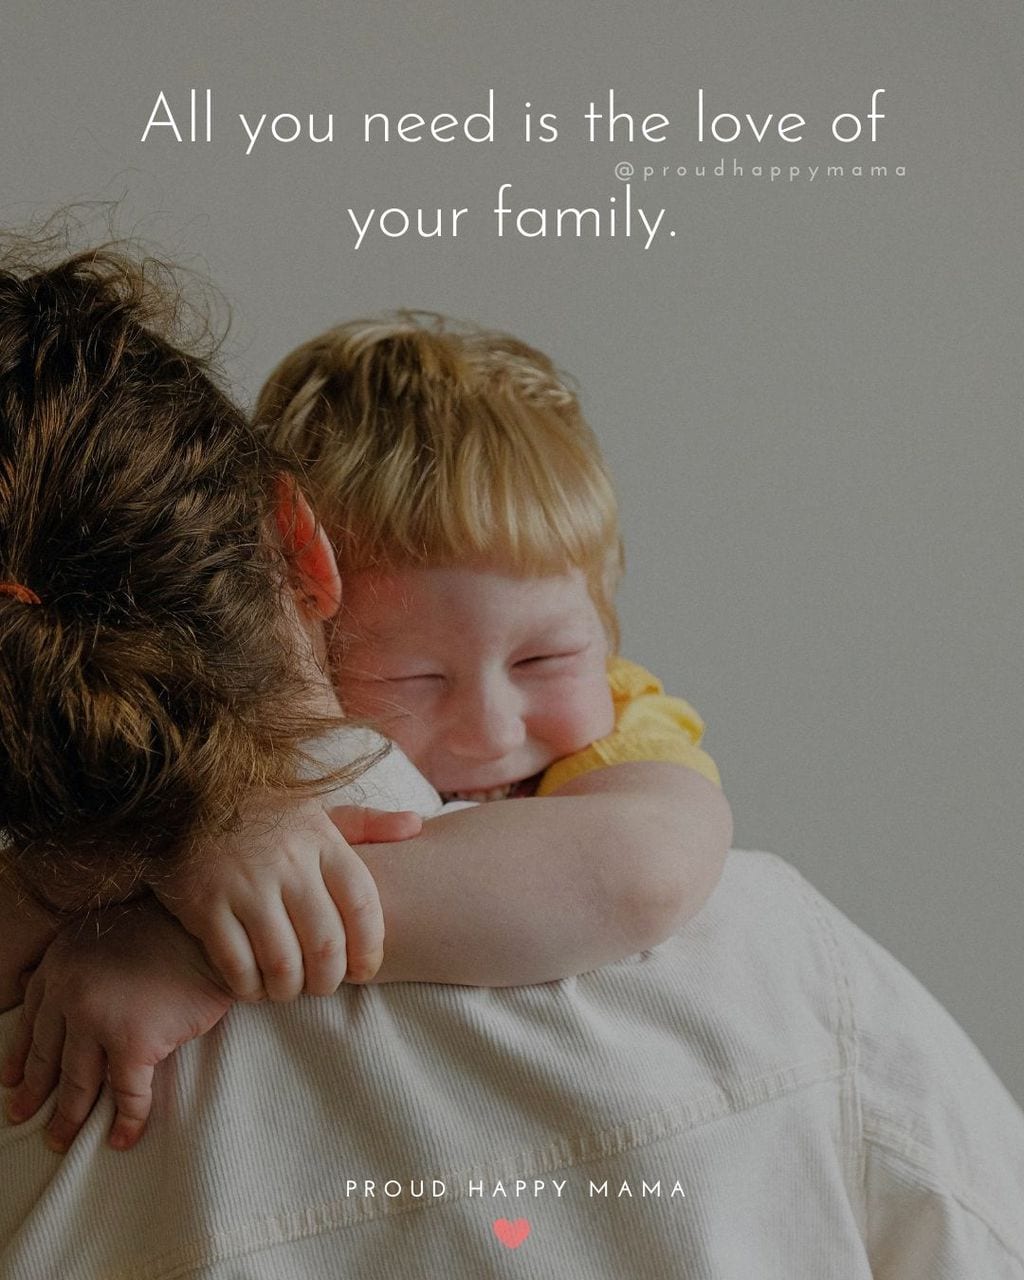 Short Quotes For Family | All you need is the love of your family.